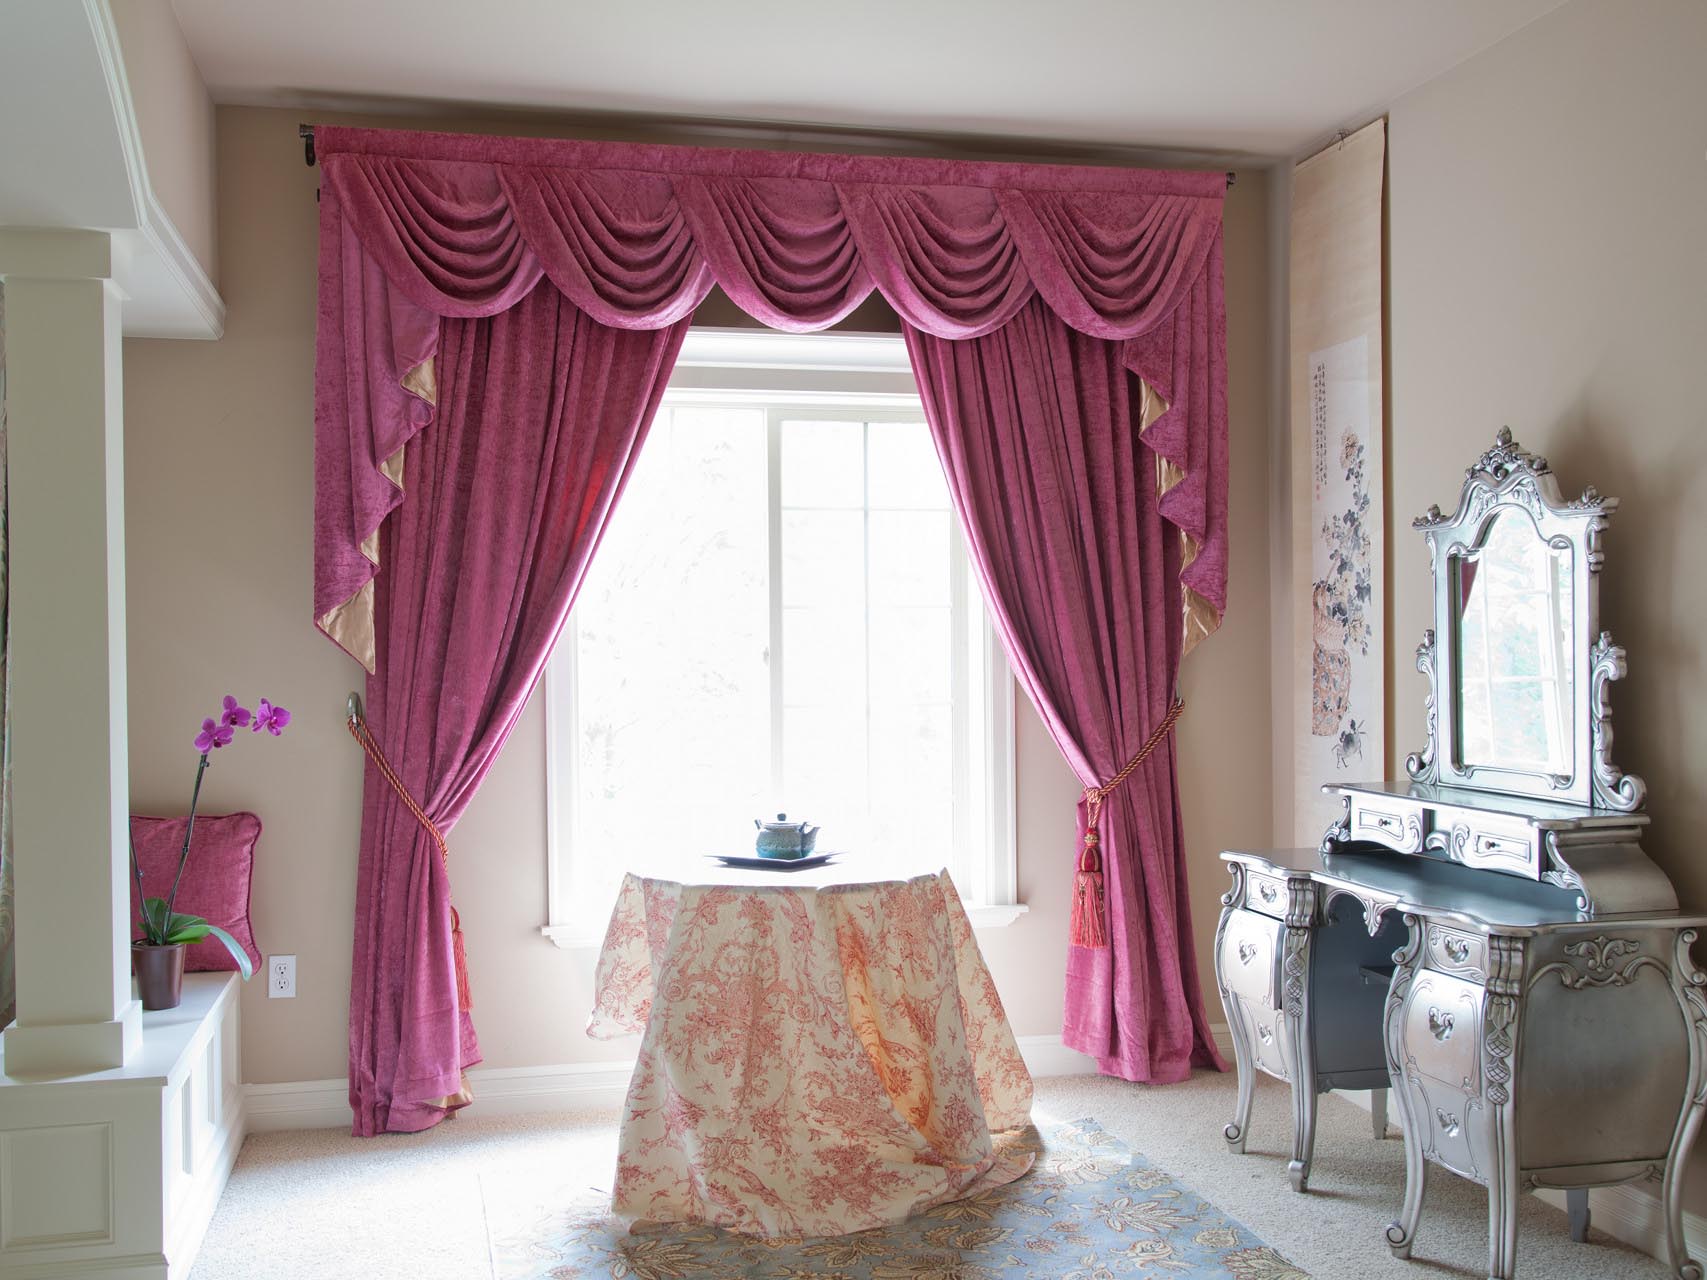 Bedroom Drapes with Valance